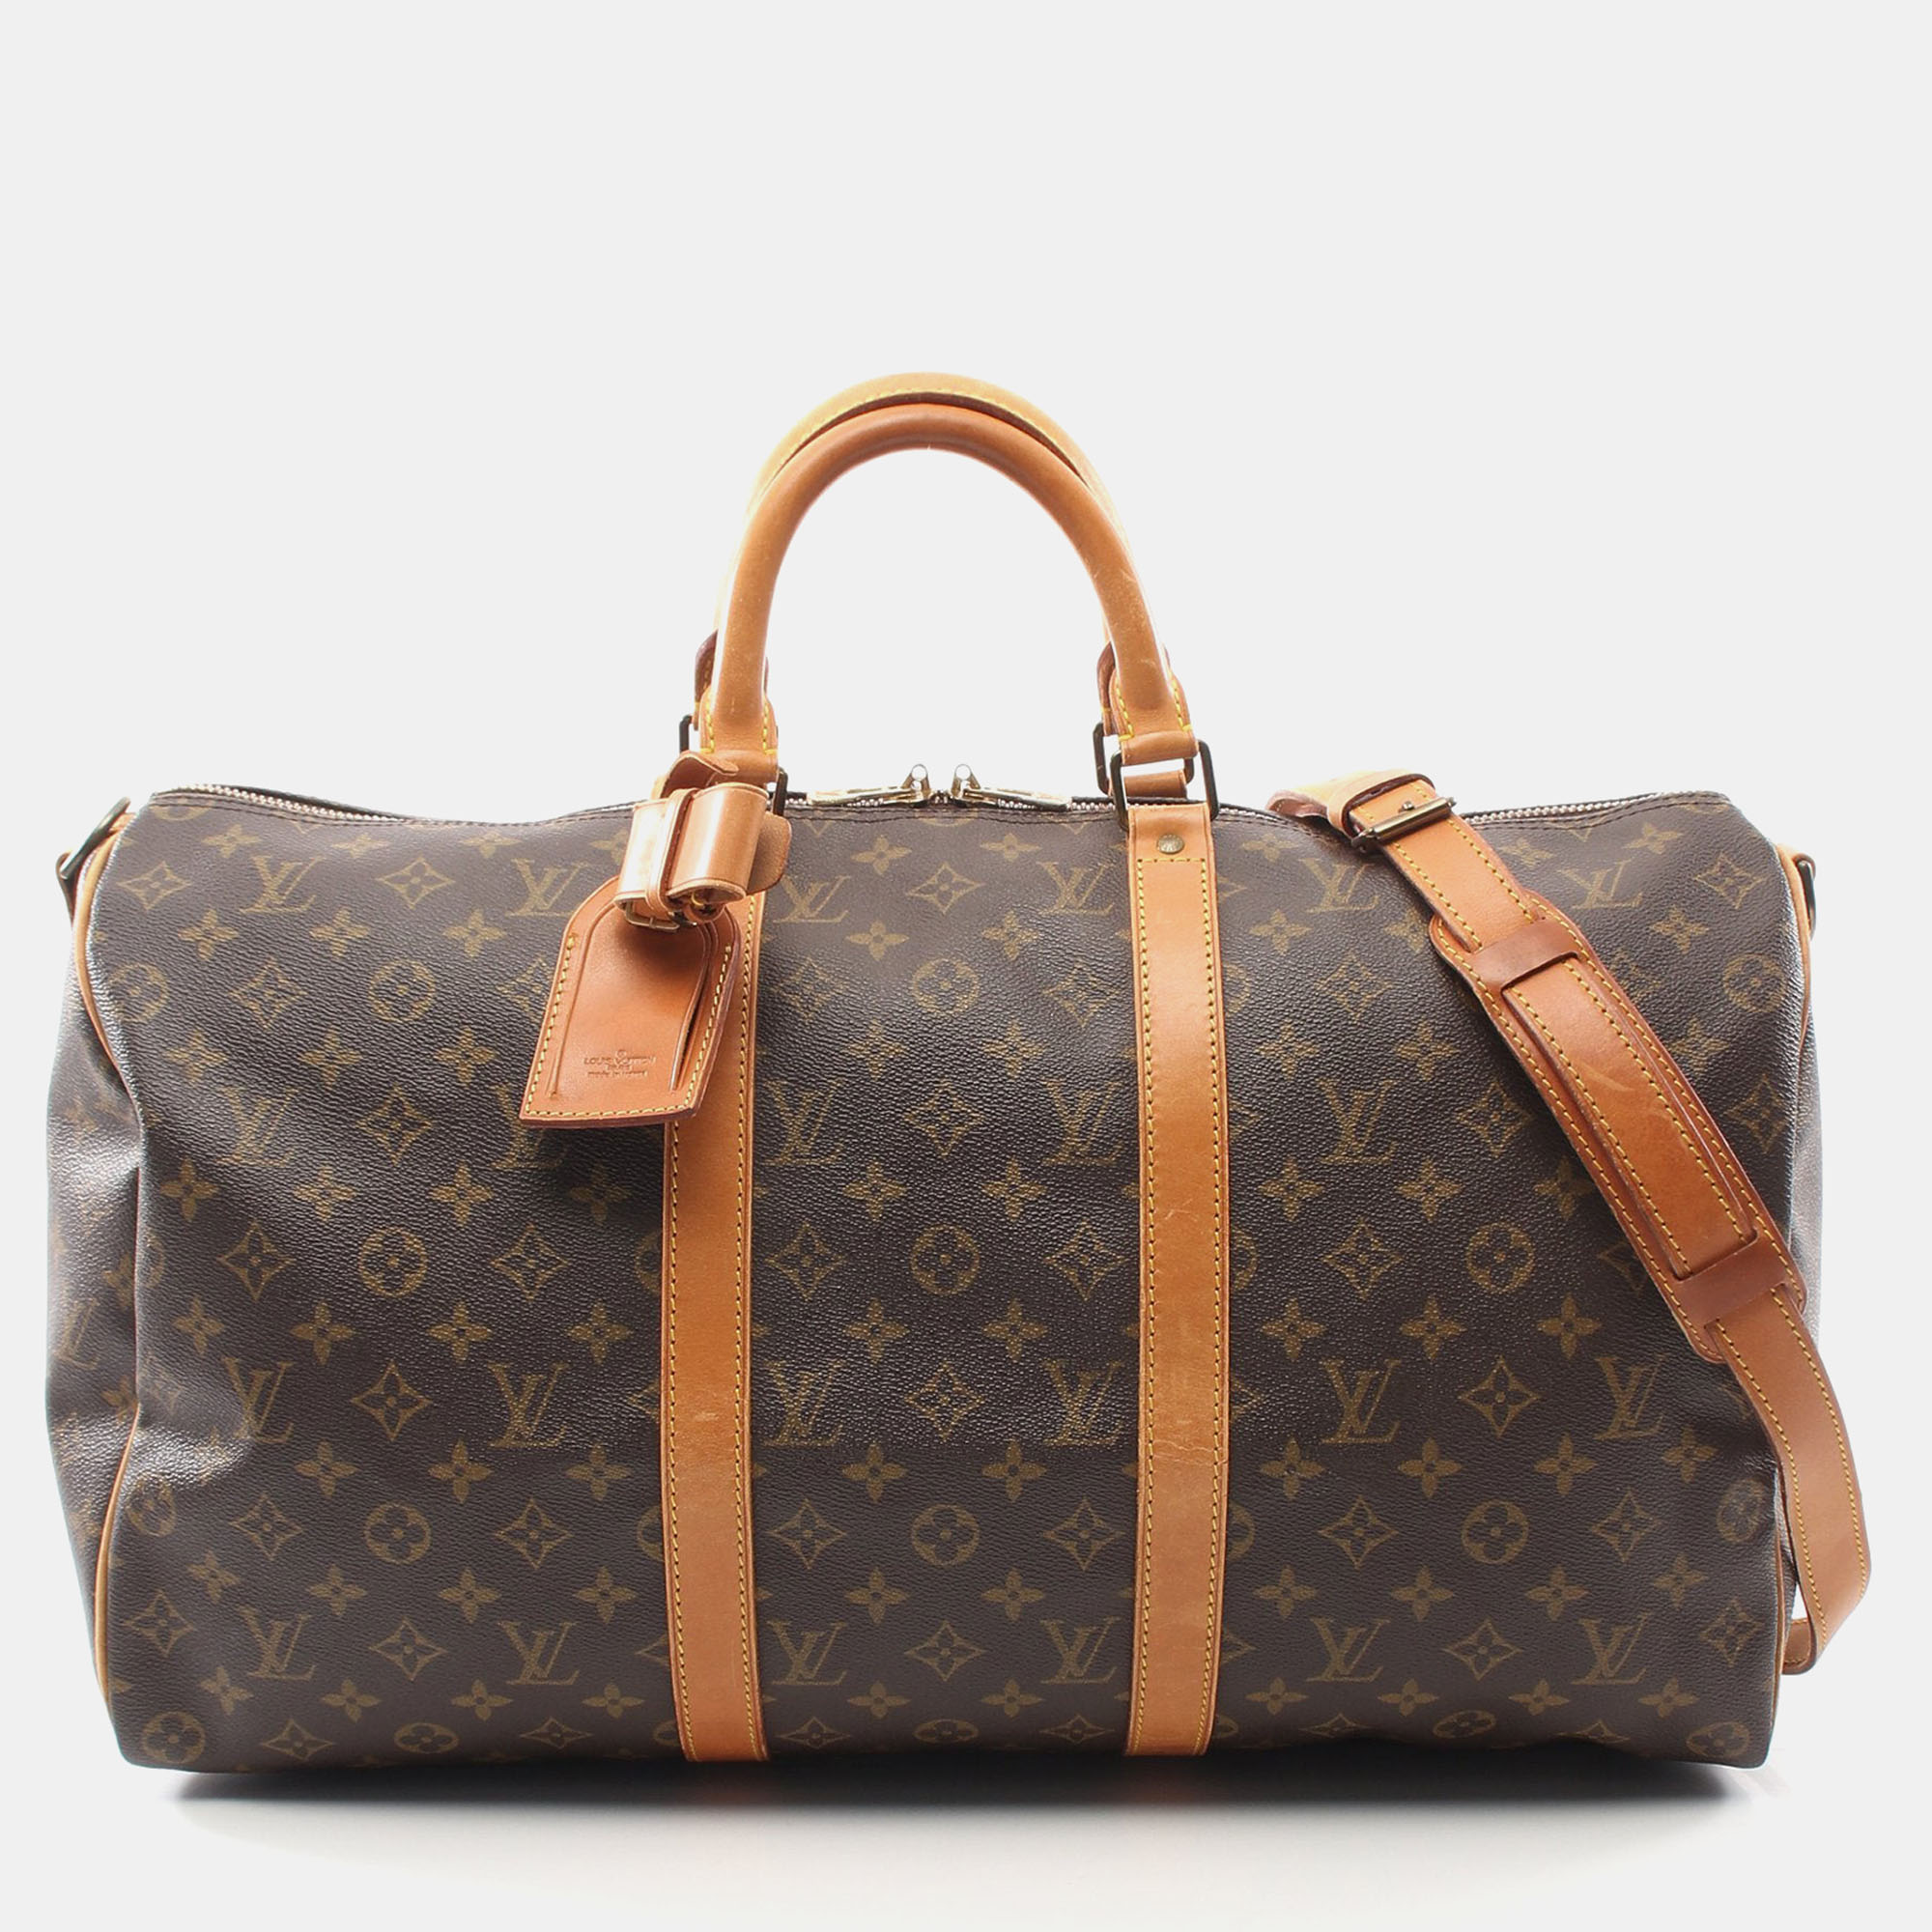 Pre-owned Louis Vuitton Keepall Bandouliere 50 Monogram Boston Bag Pvc Leather Brown 2way